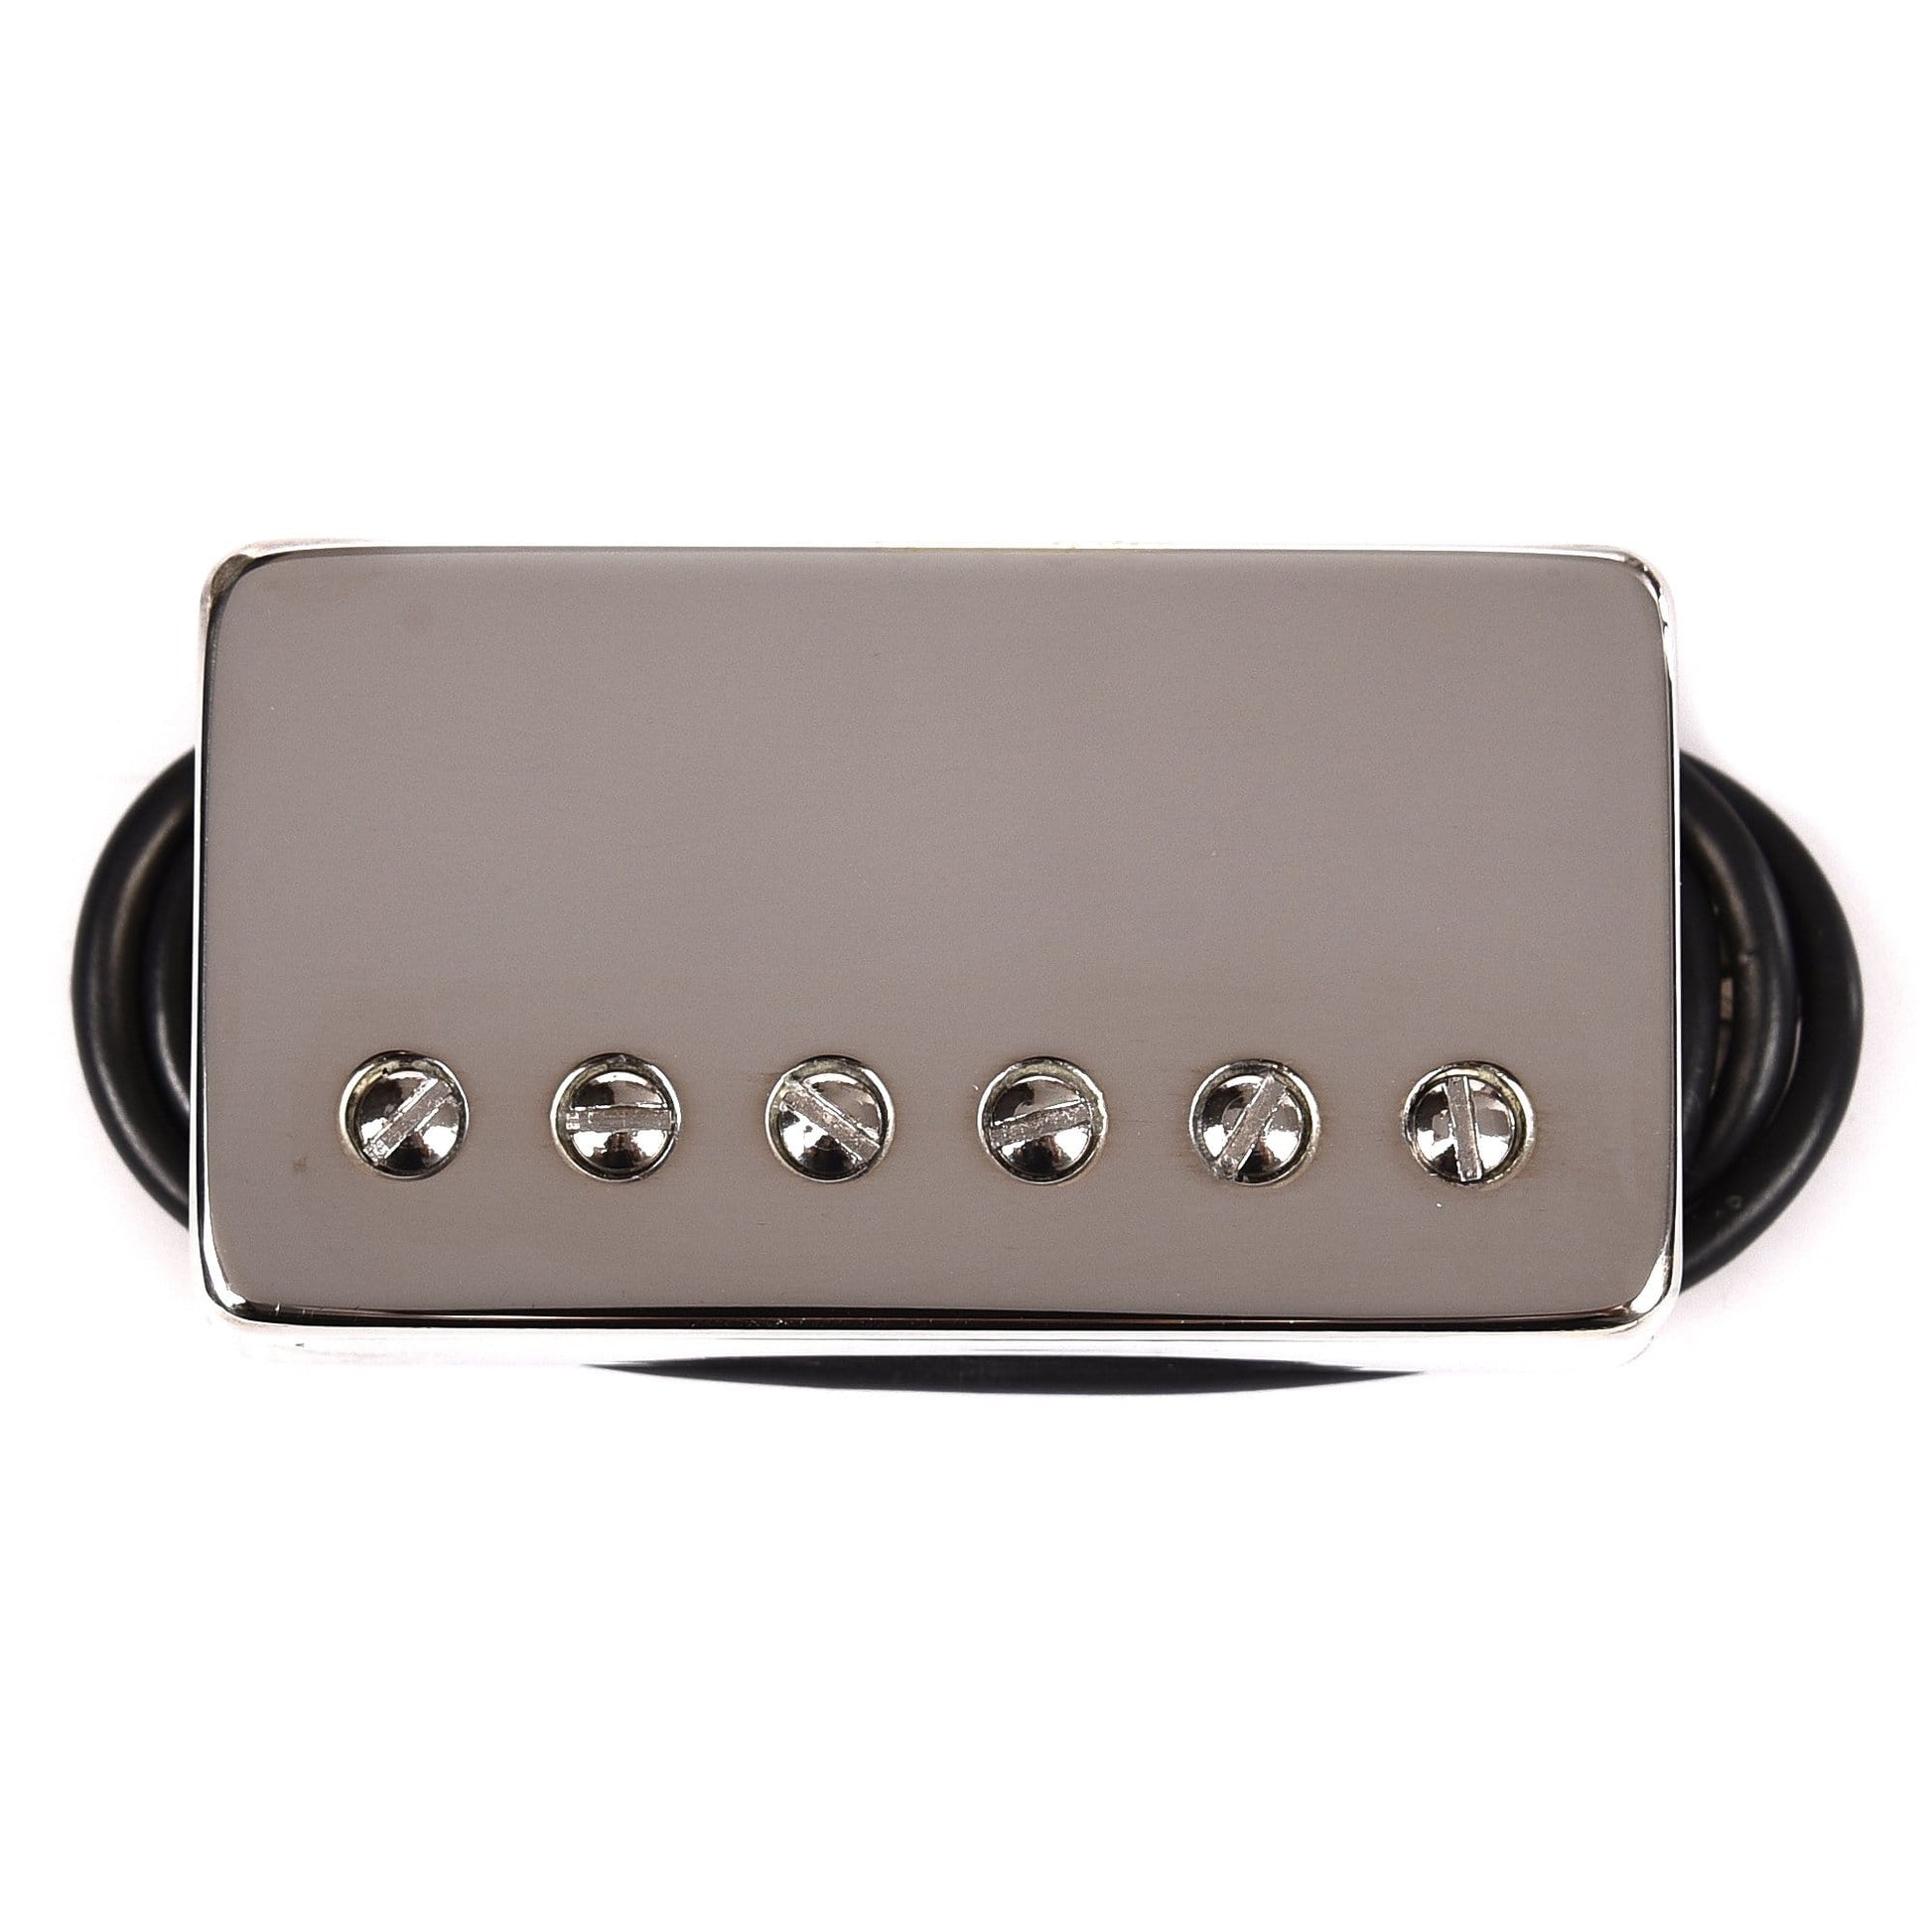 Bare Knuckle Bootcamp Humbucker Brute Force Neck 6-String 50mm Nickel Parts / Guitar Pickups